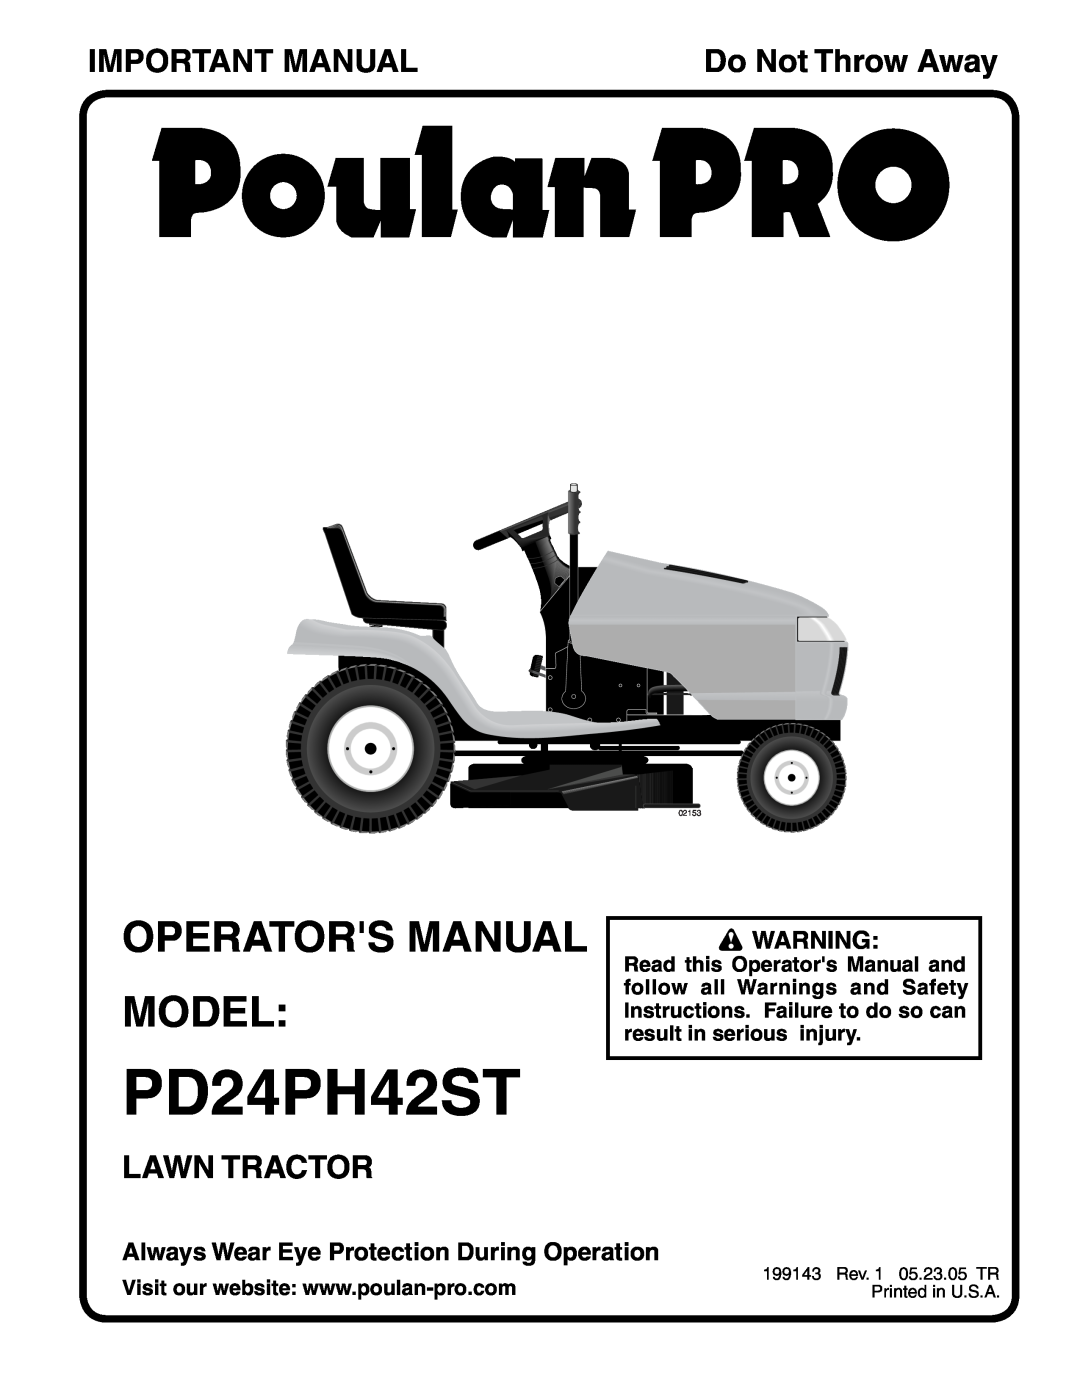 Poulan PD24PH42ST manual Operators Manual Model, Important Manual, Lawn Tractor, Do Not Throw Away, 02153 